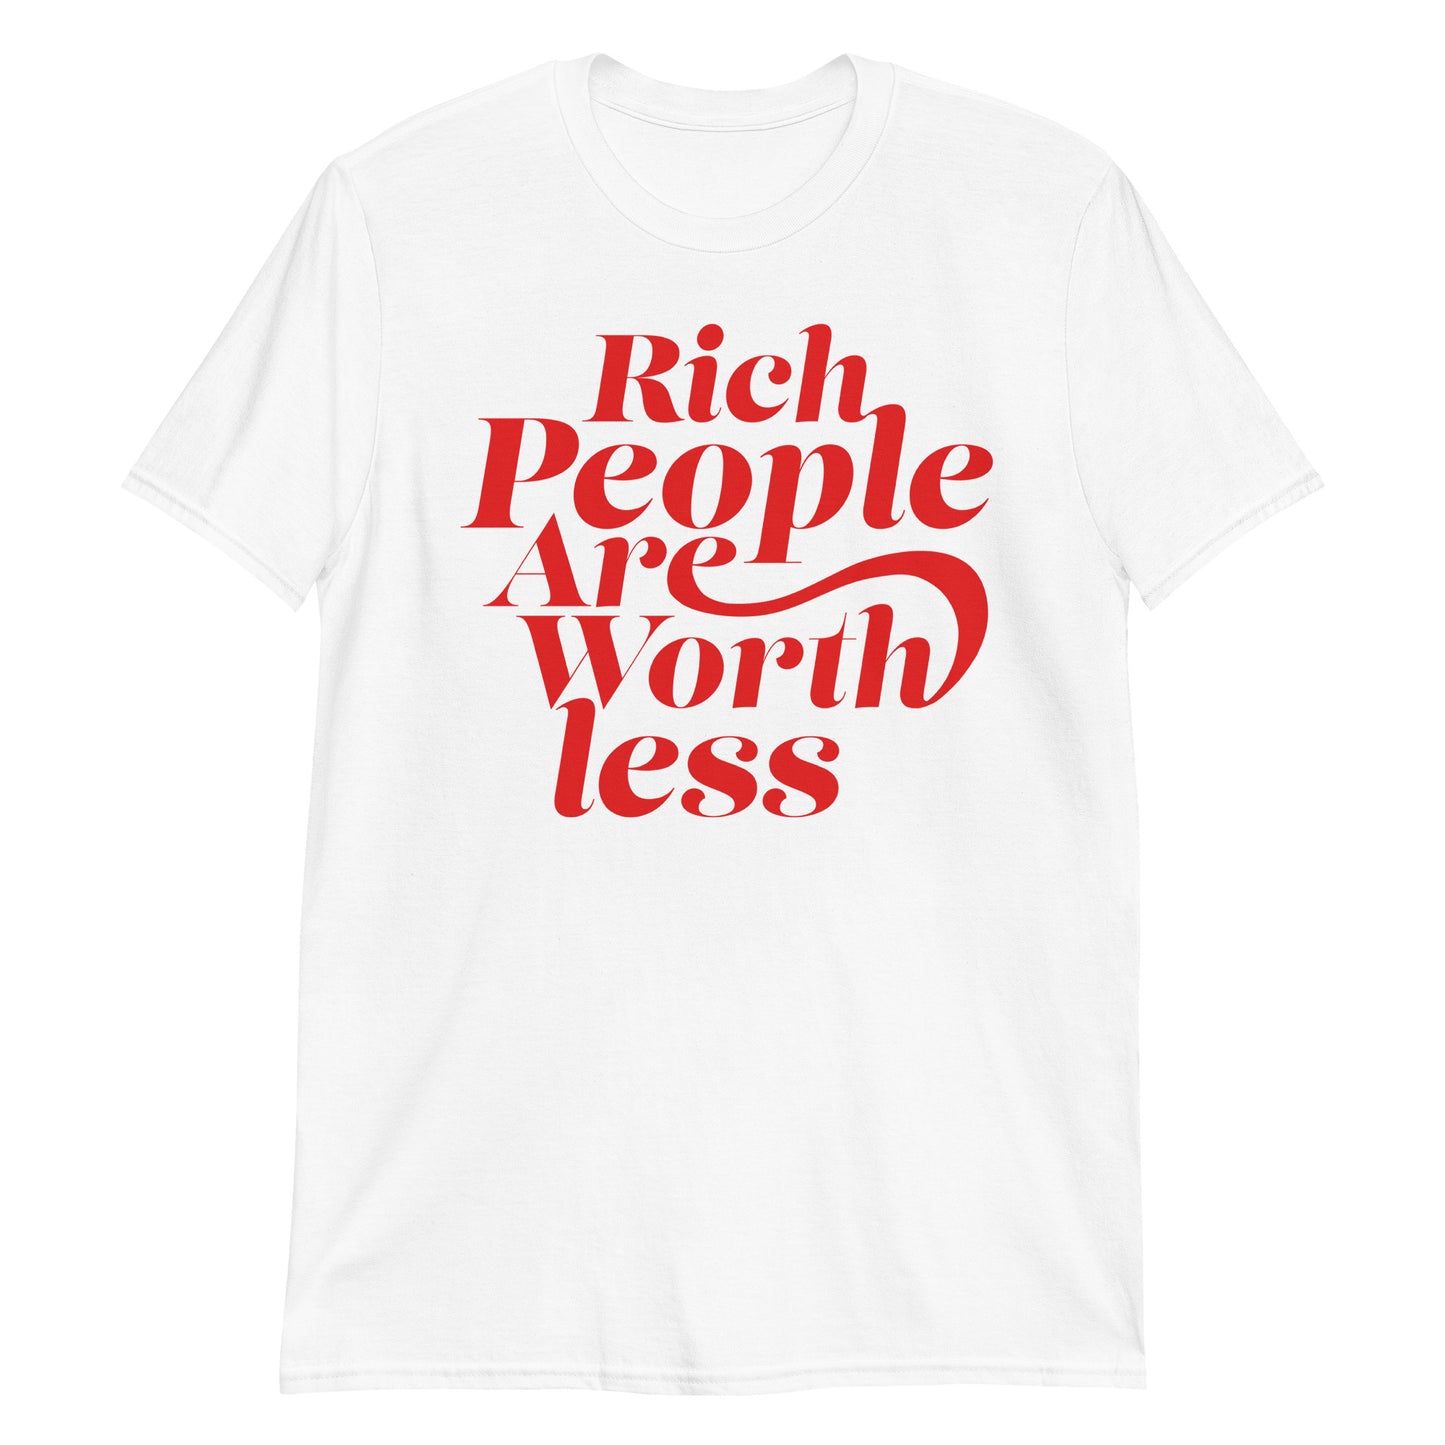 Rich People Are Worth less t-shirt